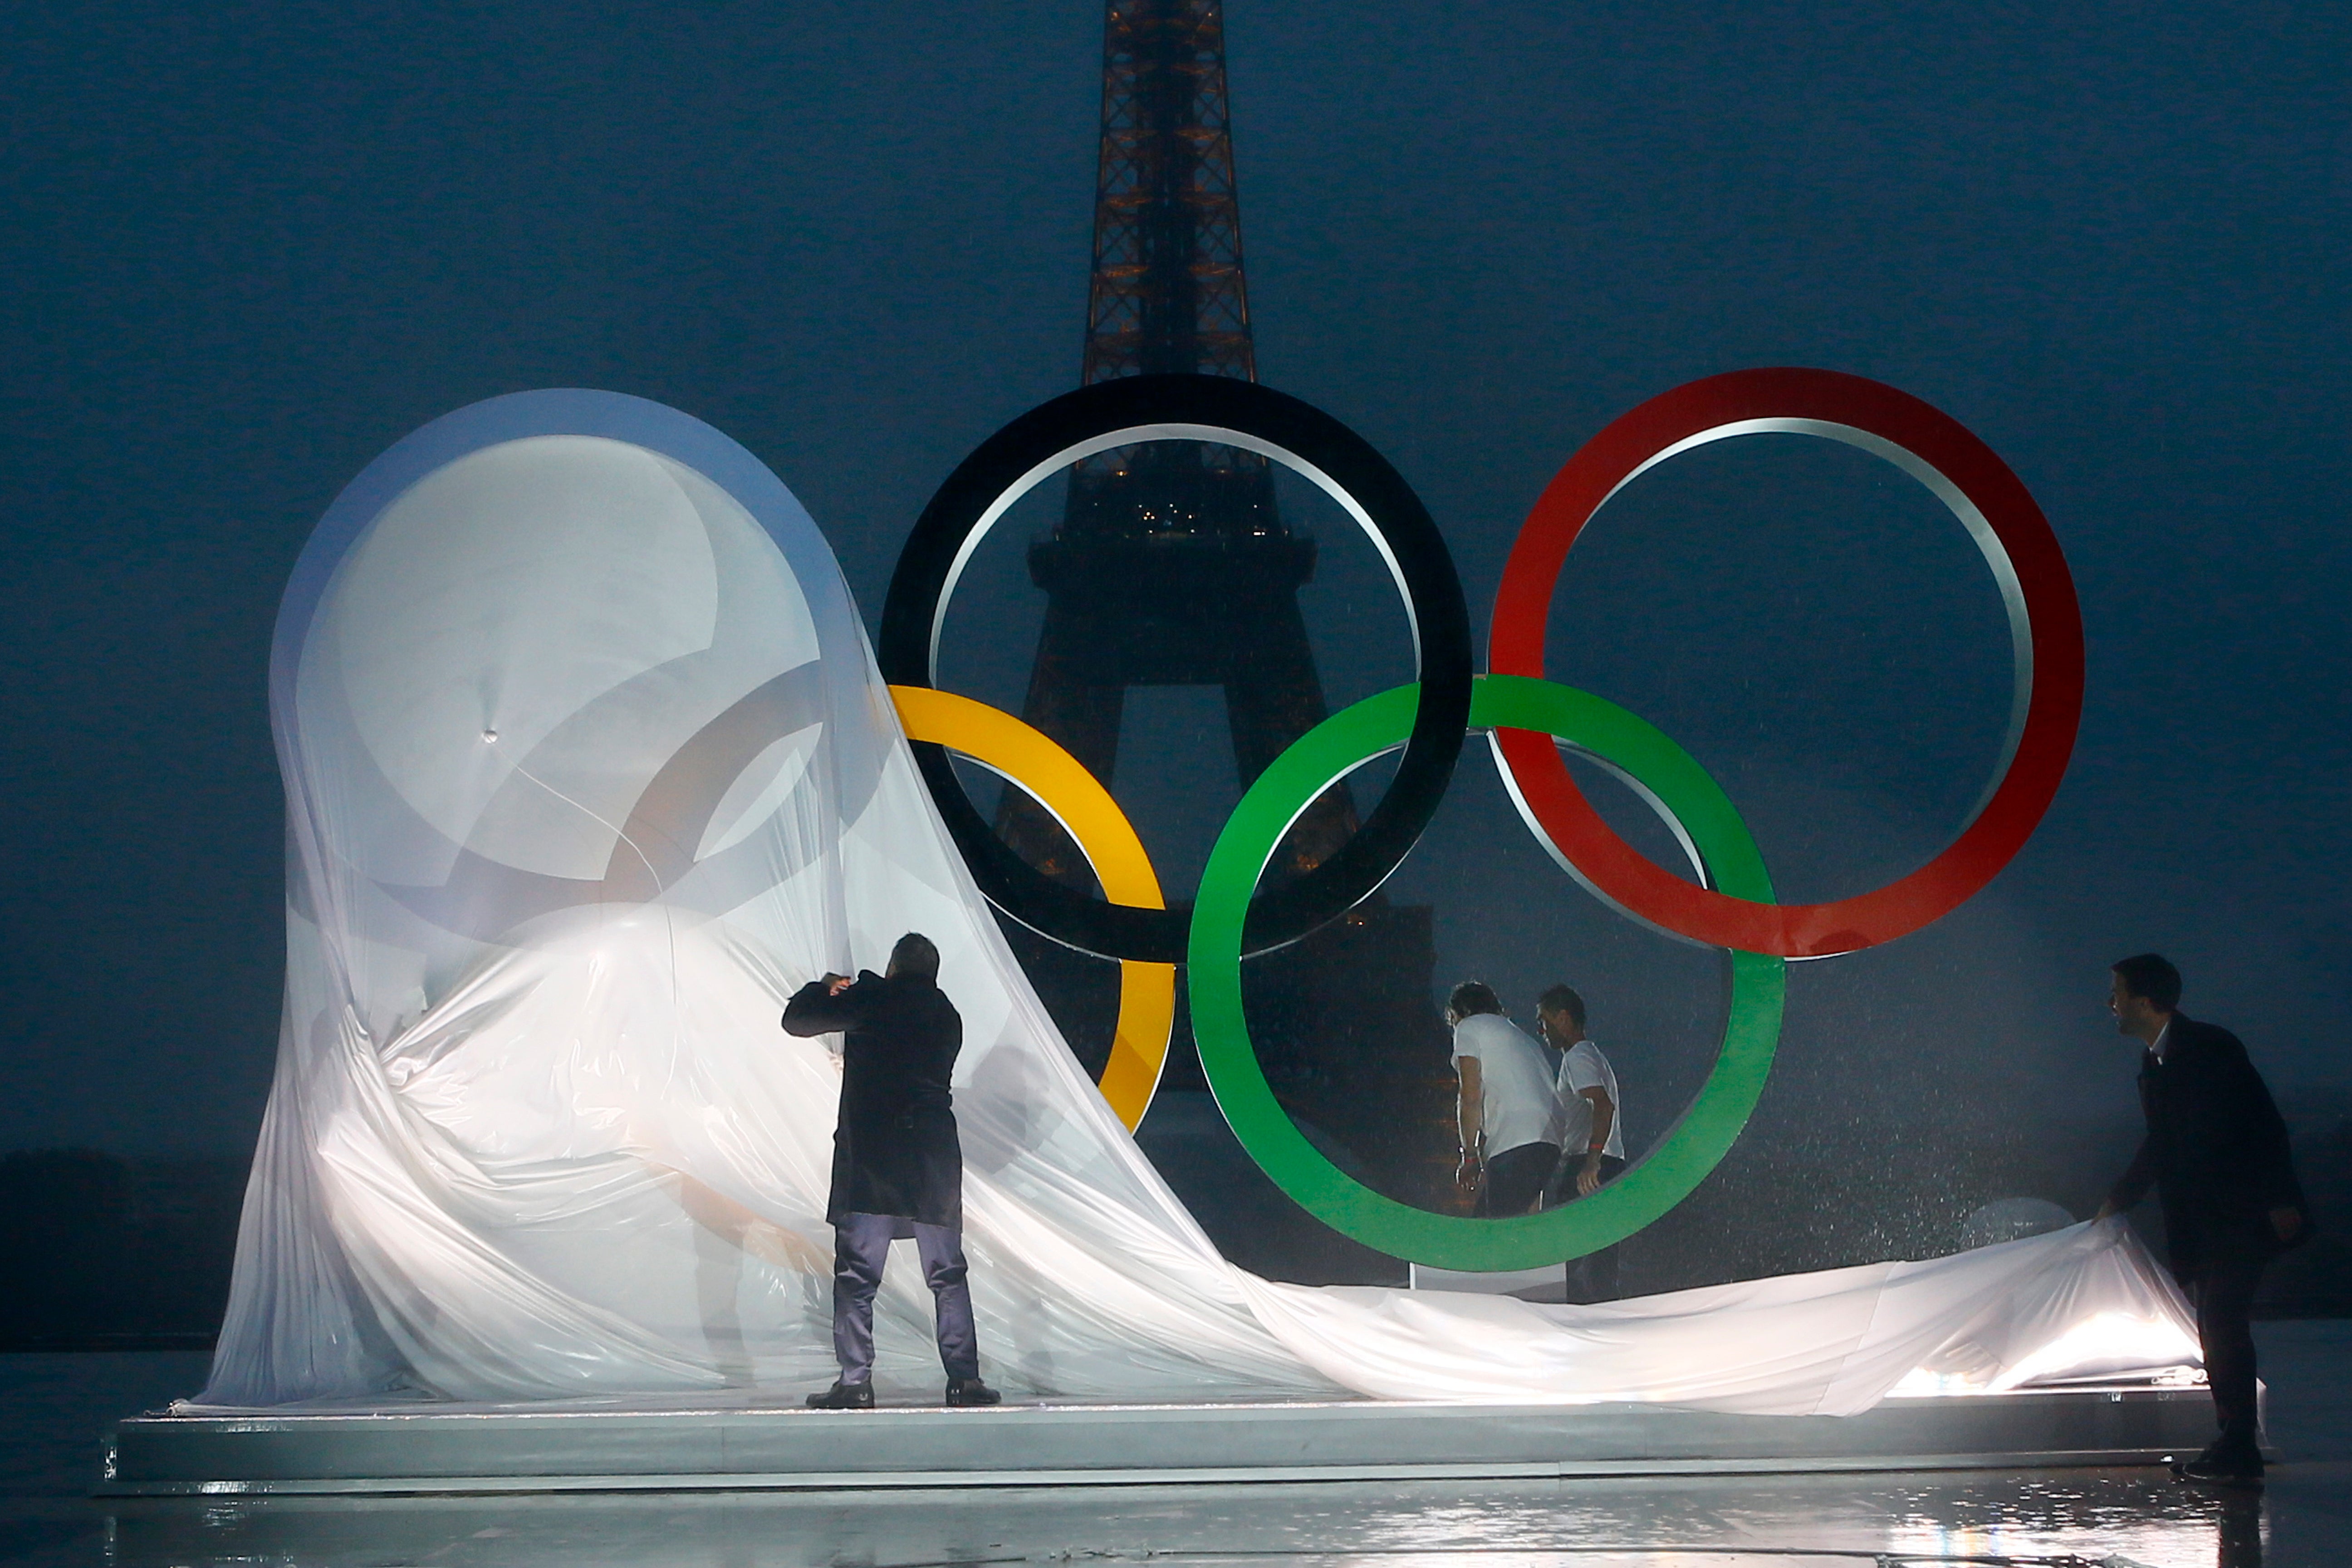 The Paris 2024 Olympic Games are one year away